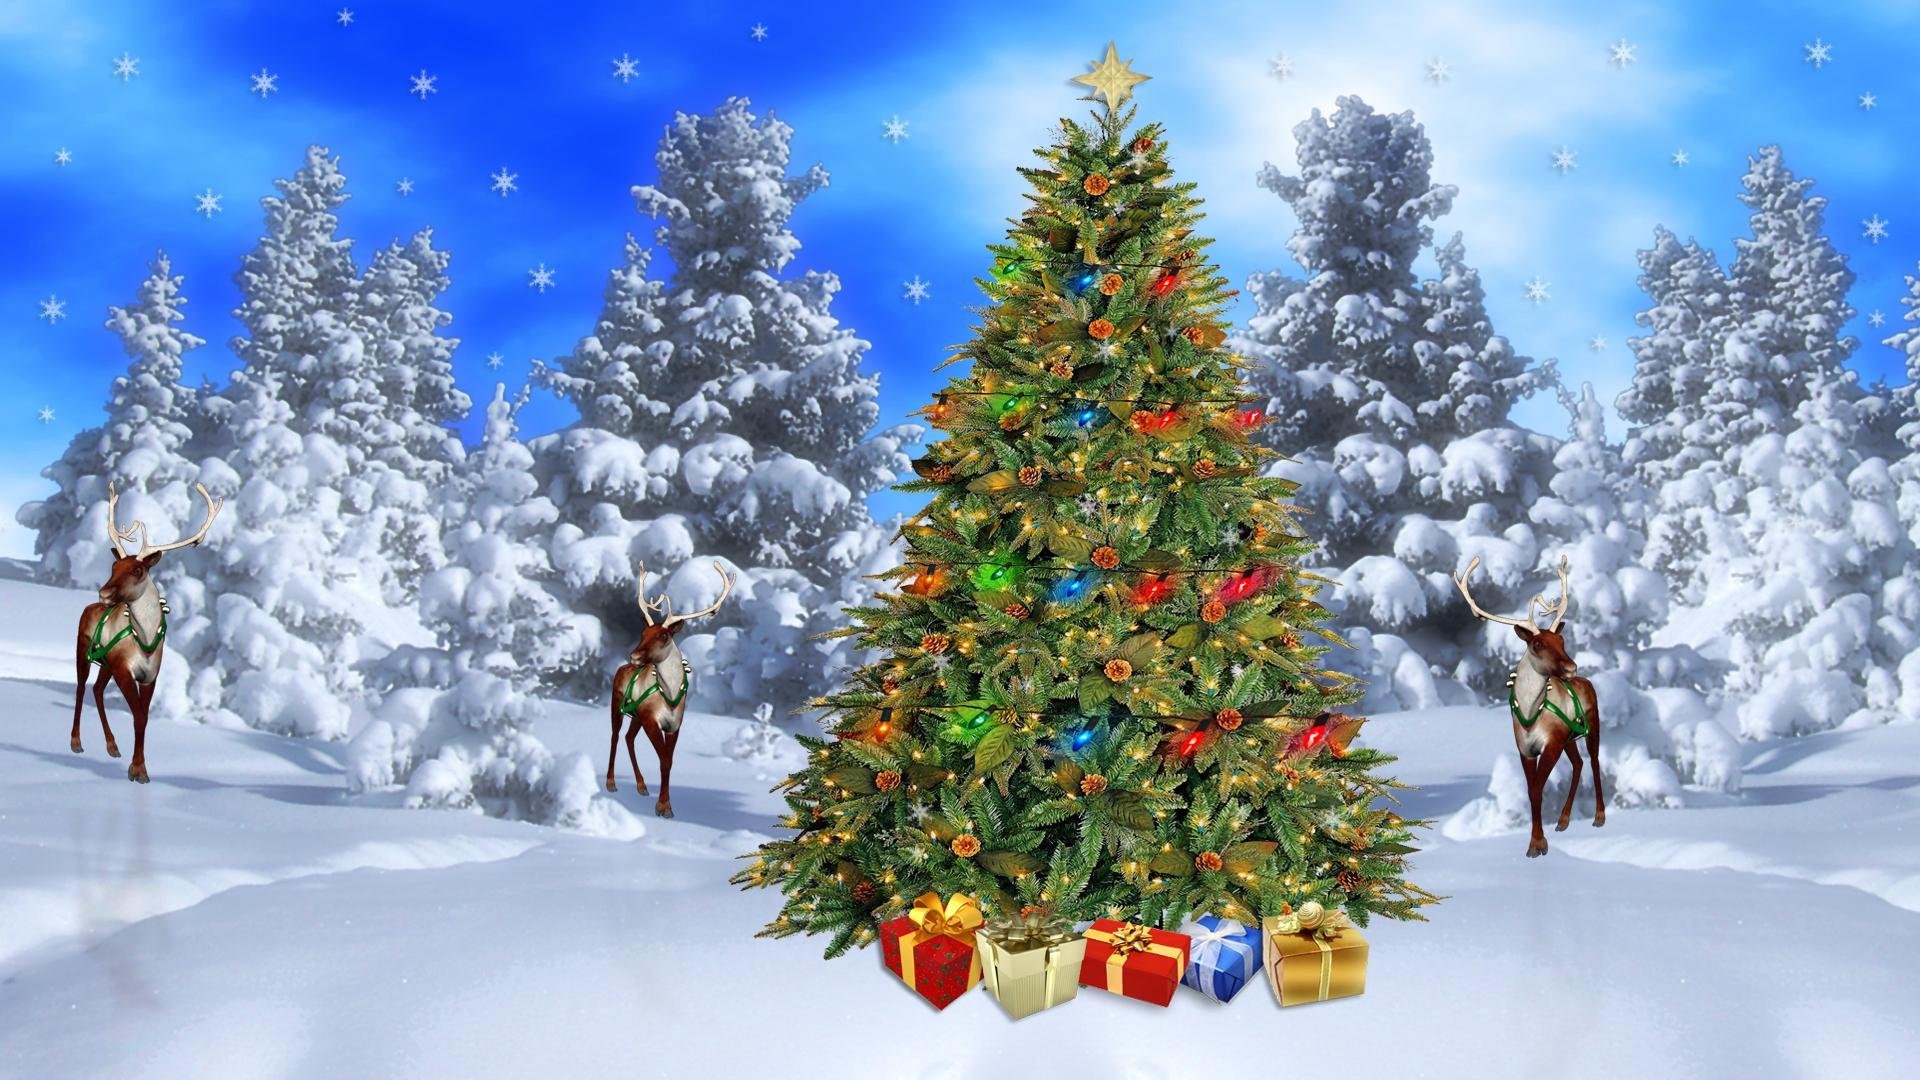 1920x1080 Find this Pin and more on Best Games Wallpapers. Christmas scene ...